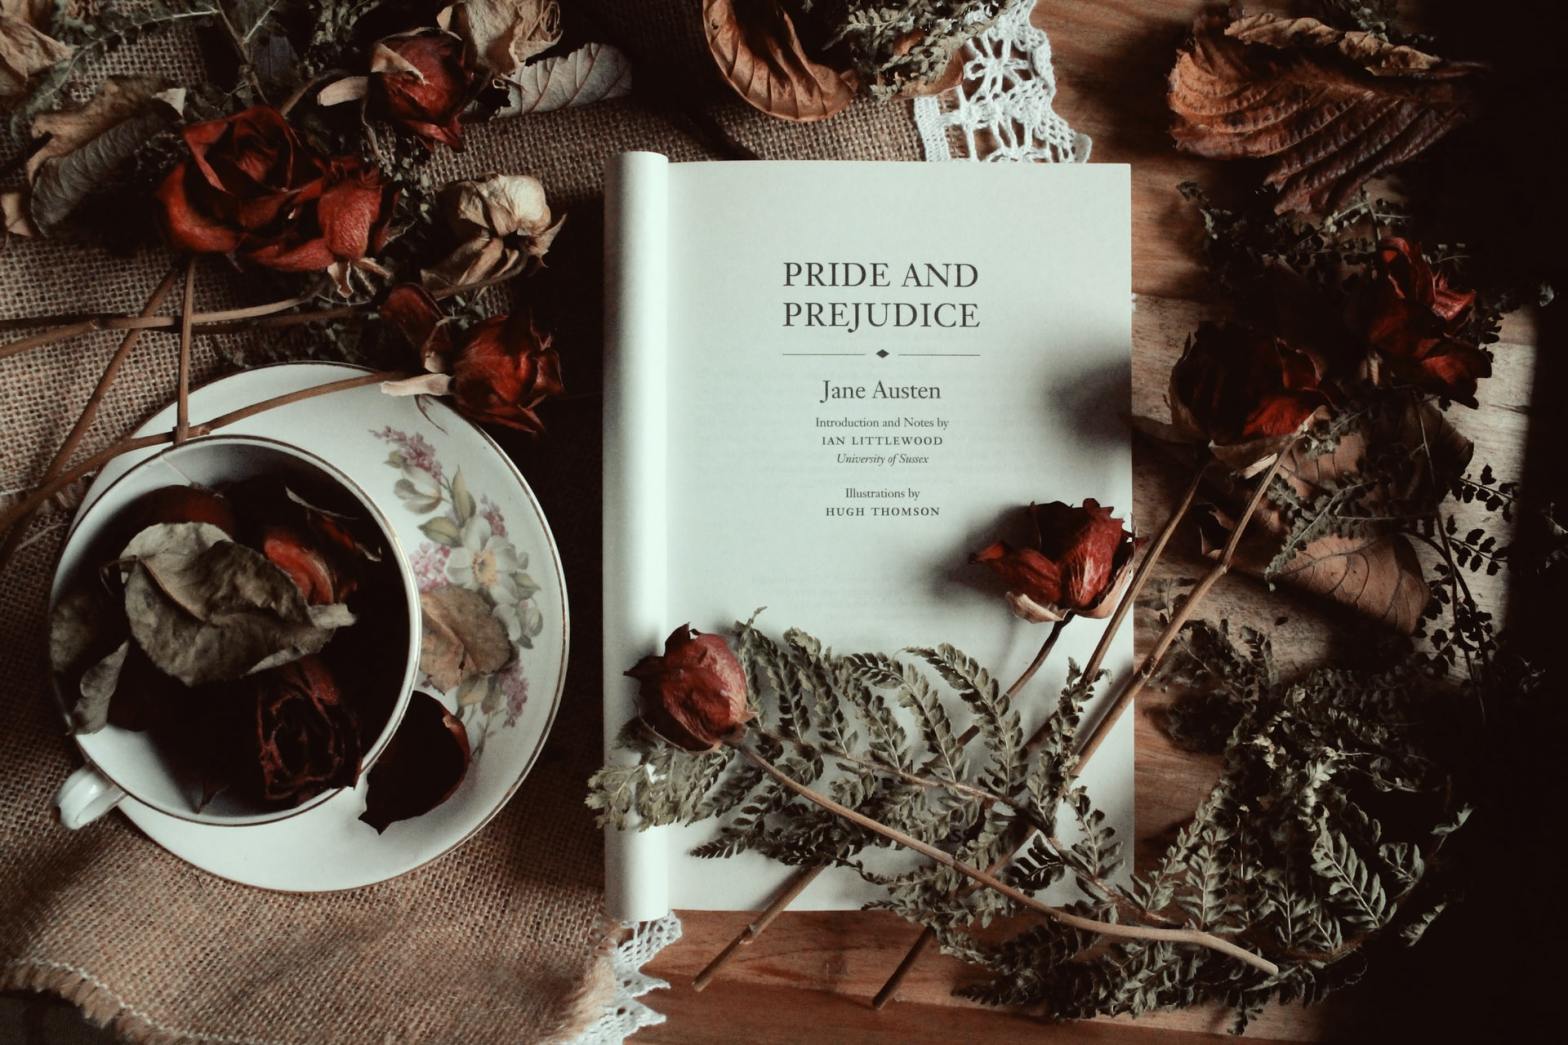 Pride and Prejudice book surrounded by flowers